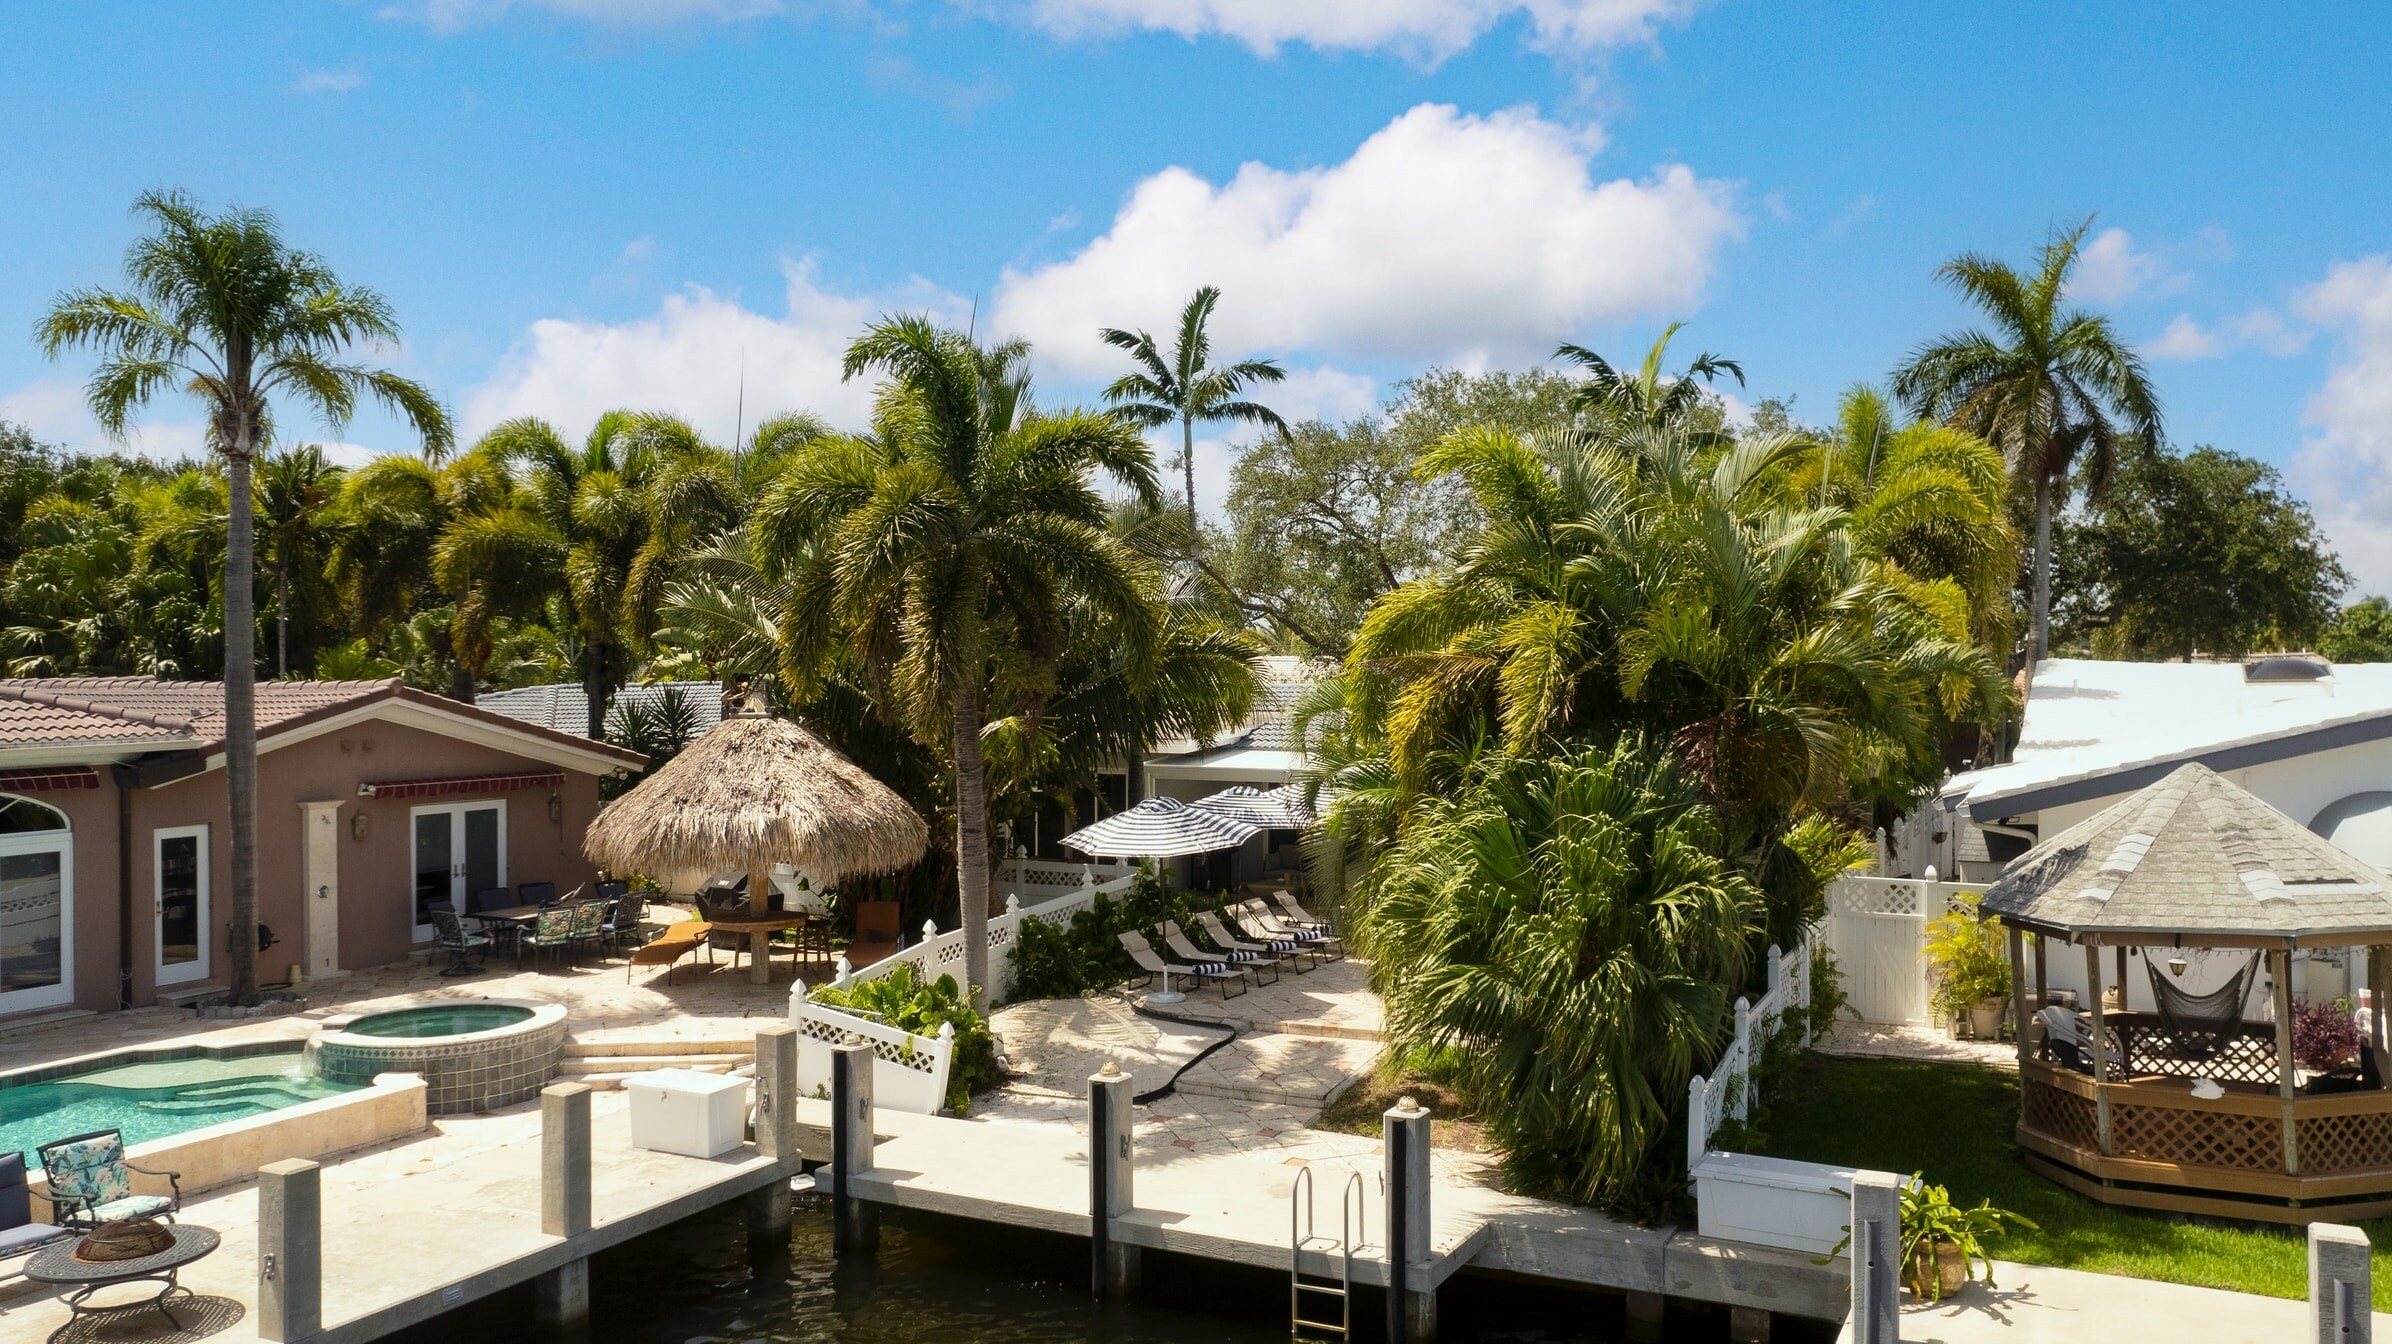 Your retreat is right on the canal and features a private pool and dock.